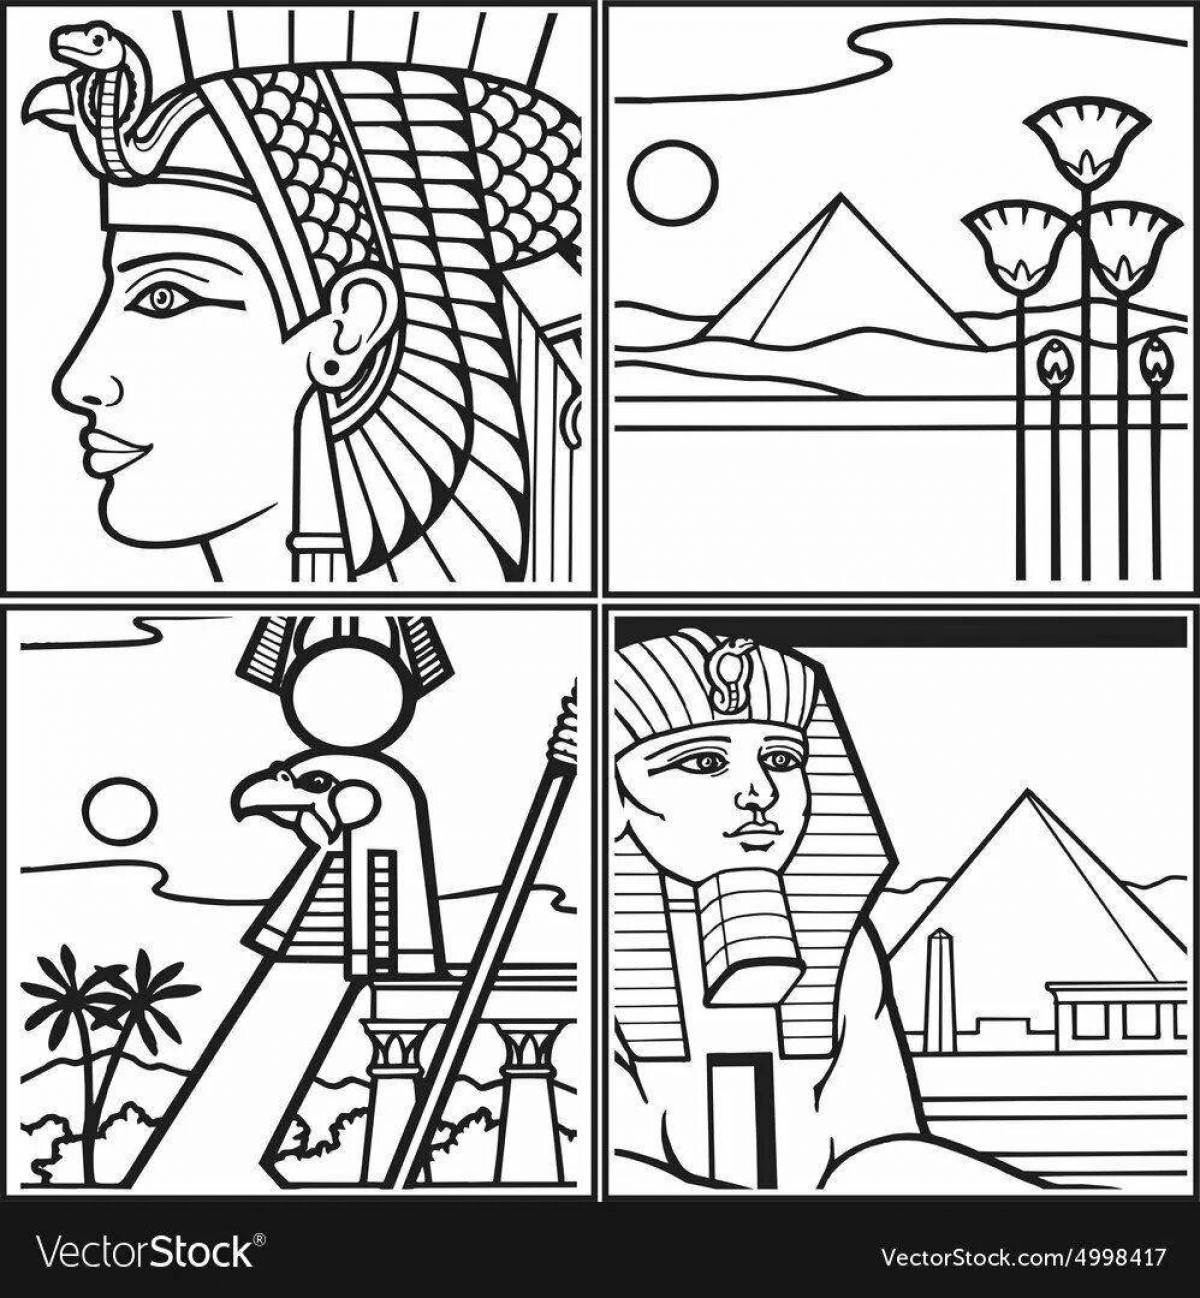 Ancient Egypt fairy tale coloring book for kids